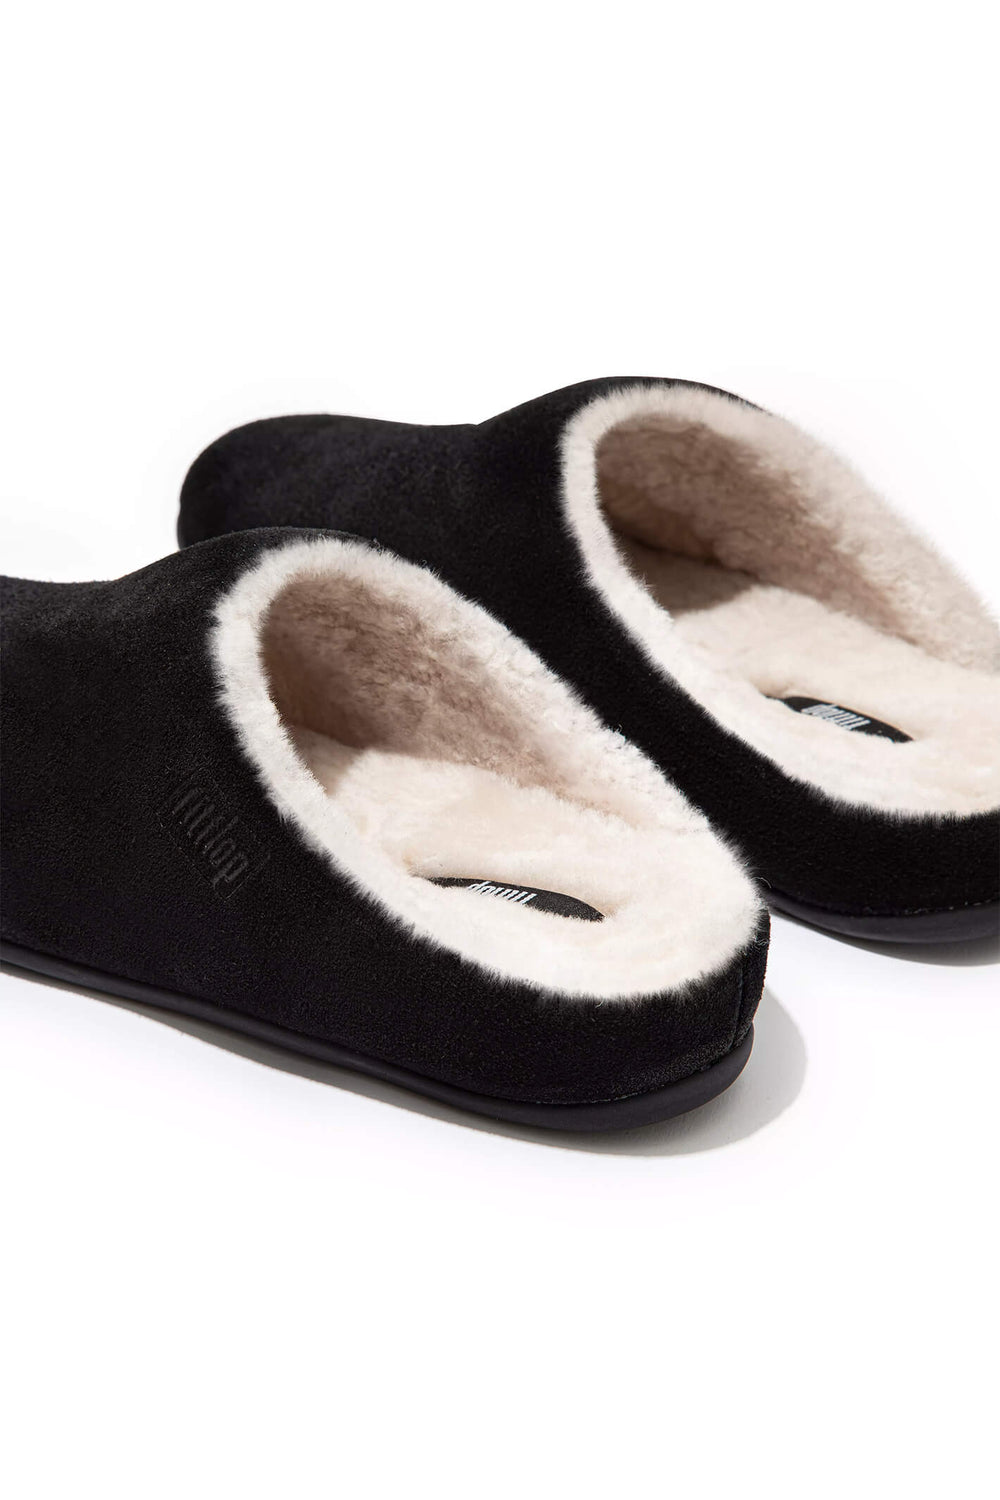 Fitflop N28-001 Chrissie Shearling Black Slipper - Shirley Allum Boutique